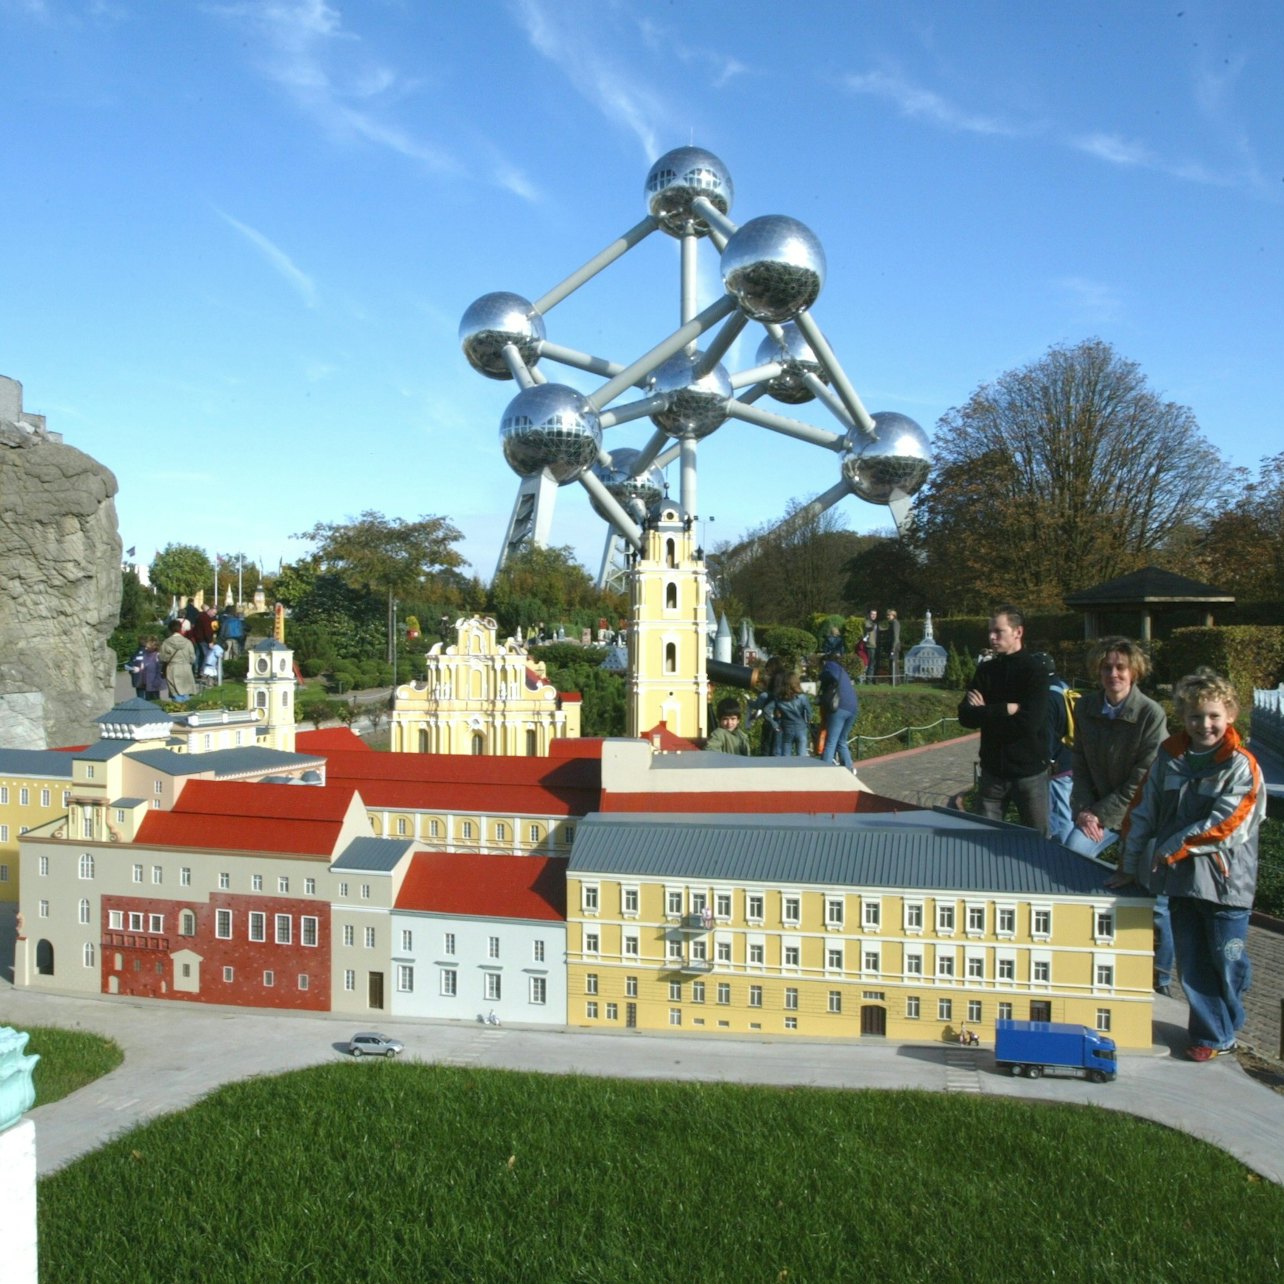 Mini-Europe - Accommodations in Brussels